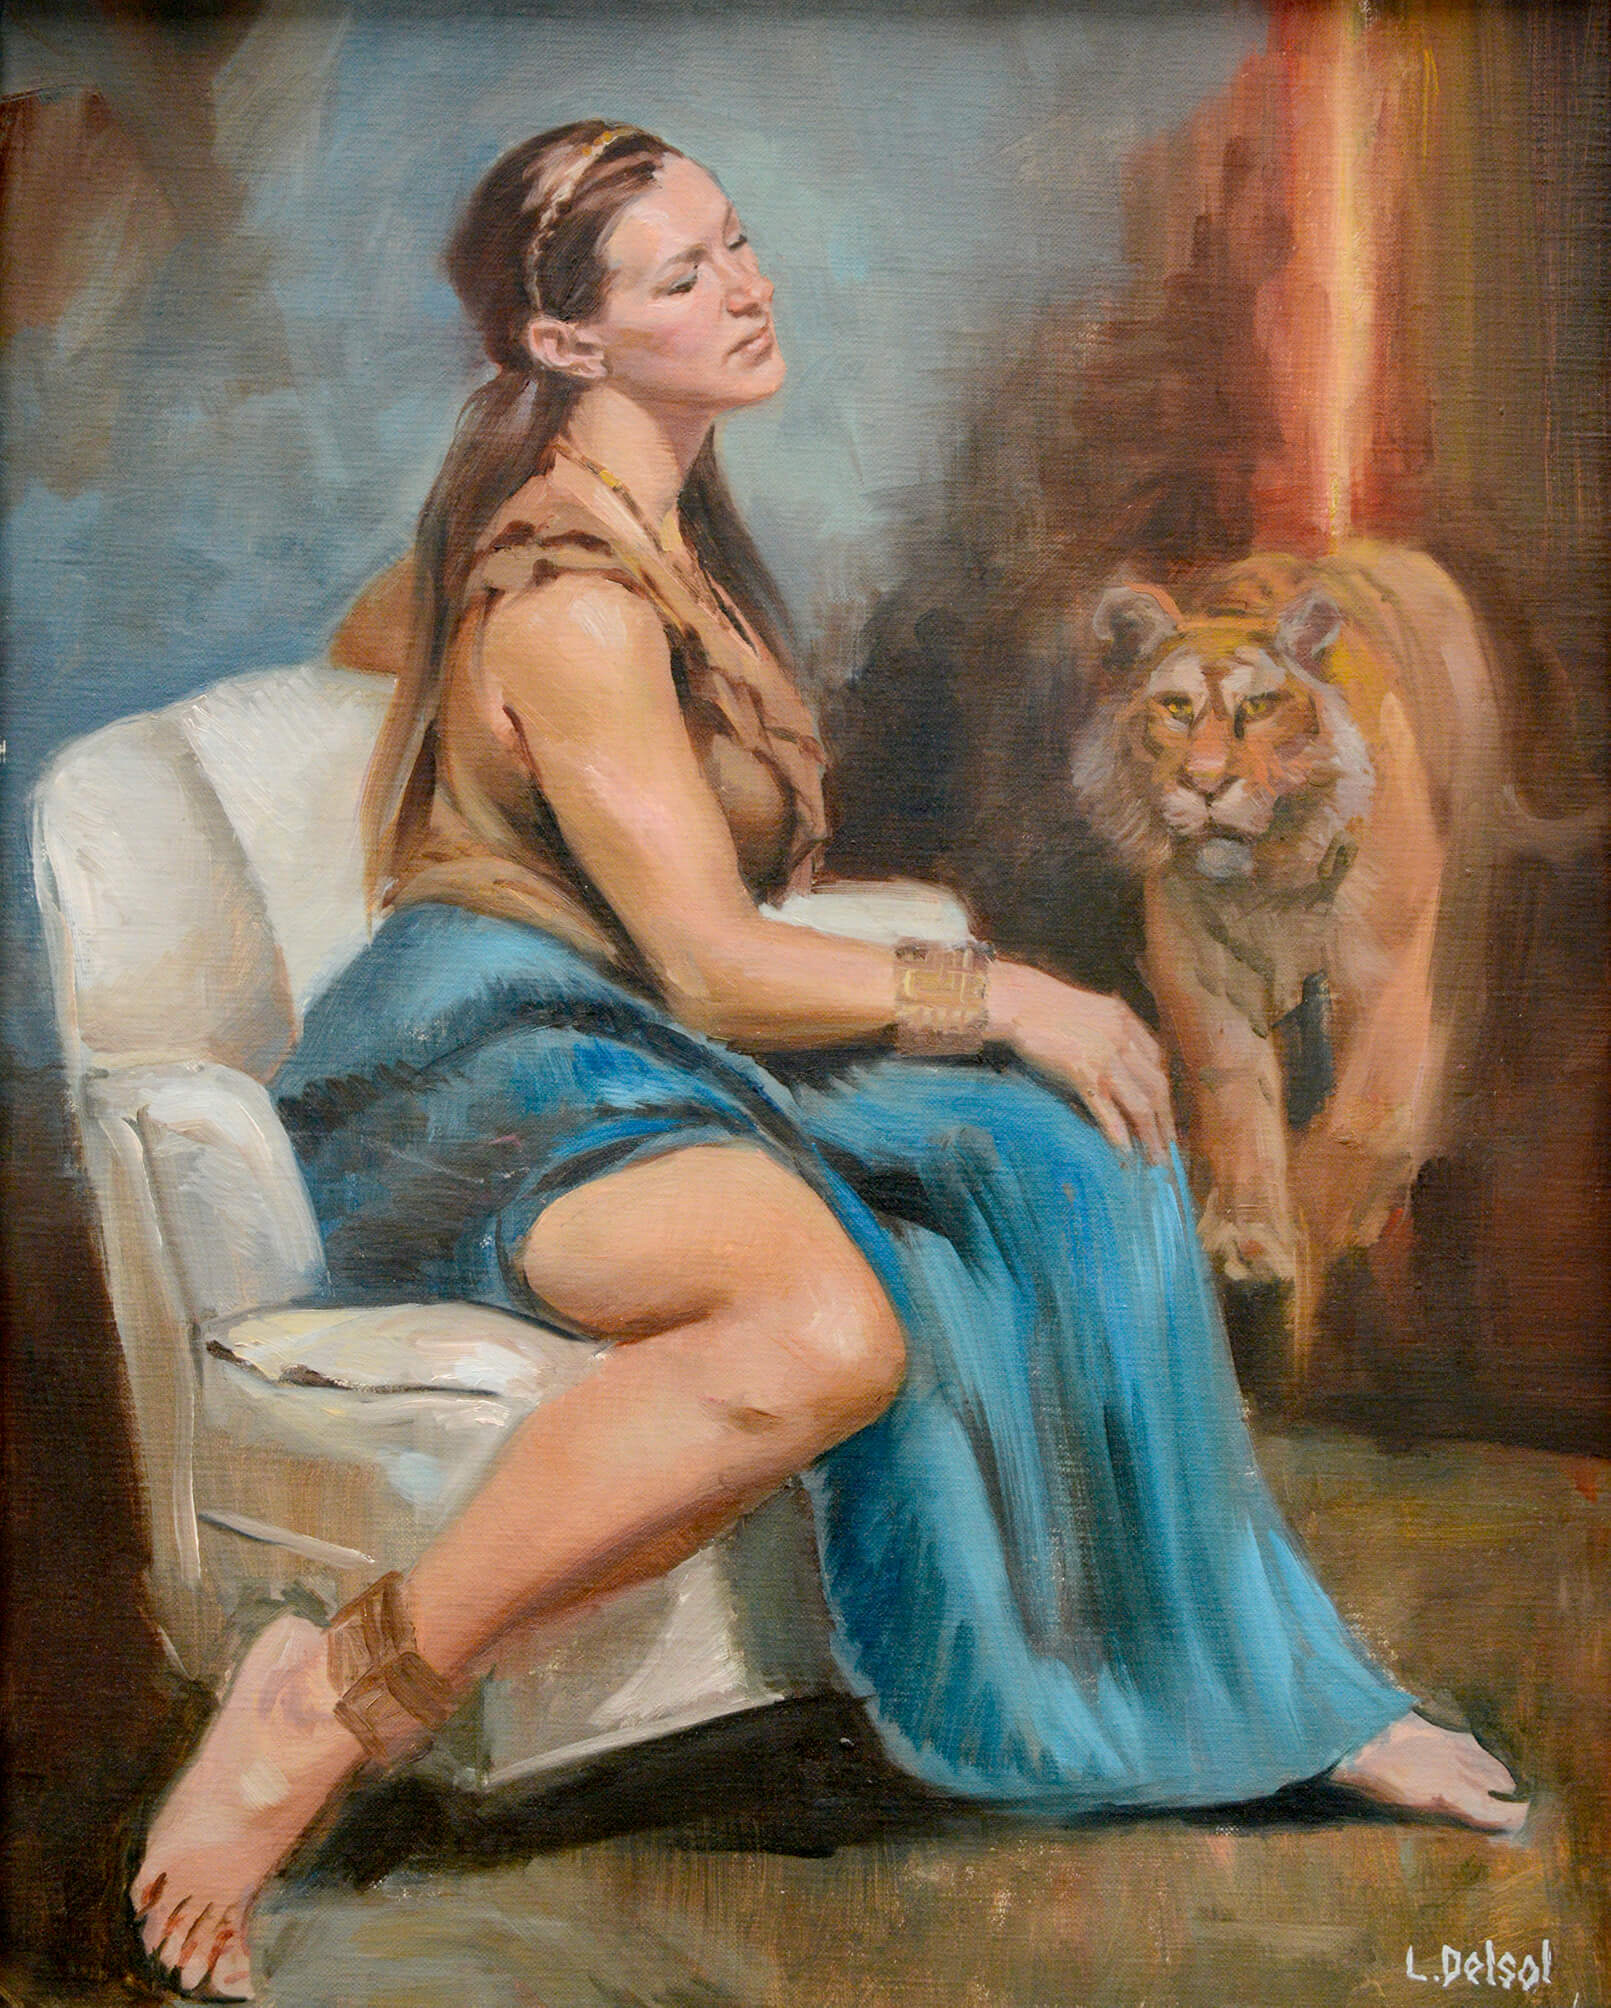 Realistic full figure oil portrait of a young woman with long blonde hair in 3/4 profile gazing off into the room as a tiger approaches